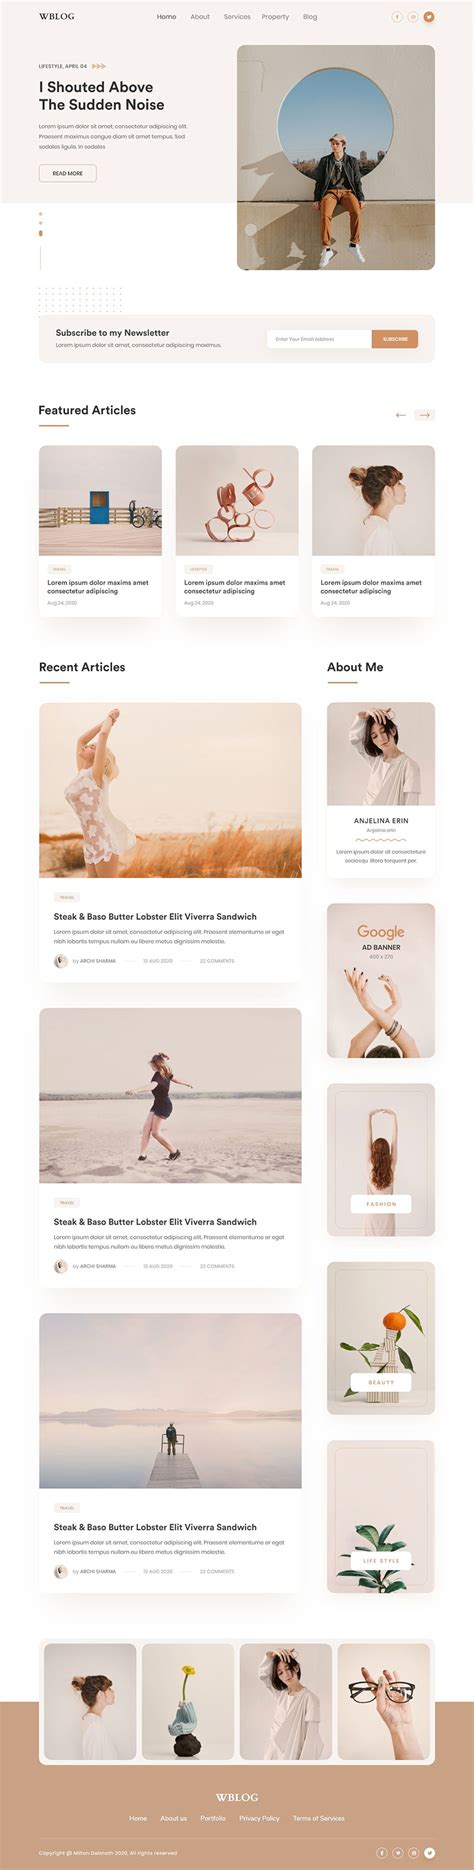 Create Website Wife Photos Naked Template Images